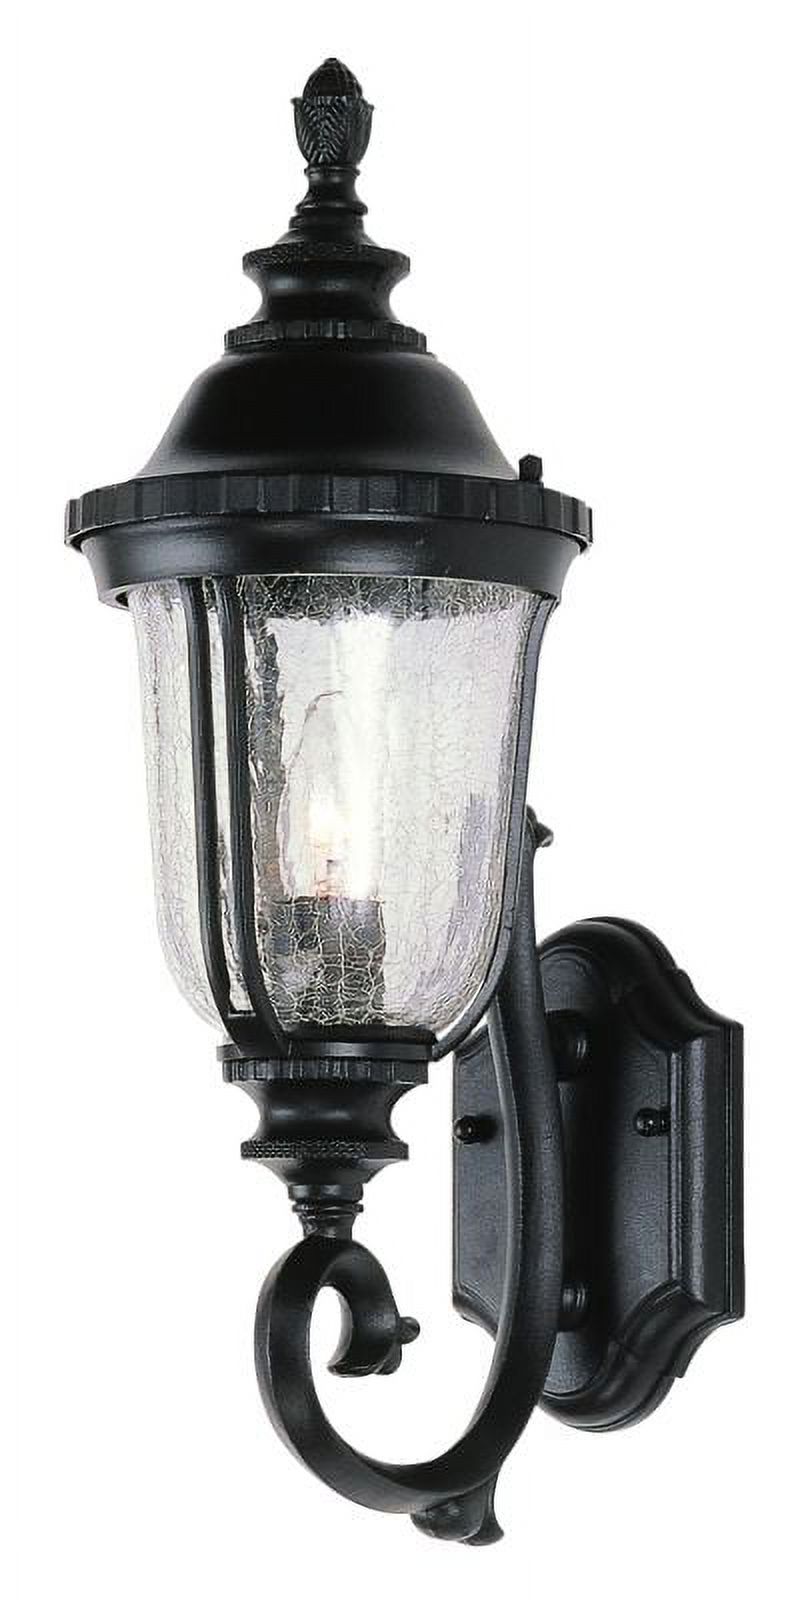 Trans Globe Lighting 4021 1 Light Up Lighting Outdoor Wall Sconce From The Outdoor - image 1 of 1